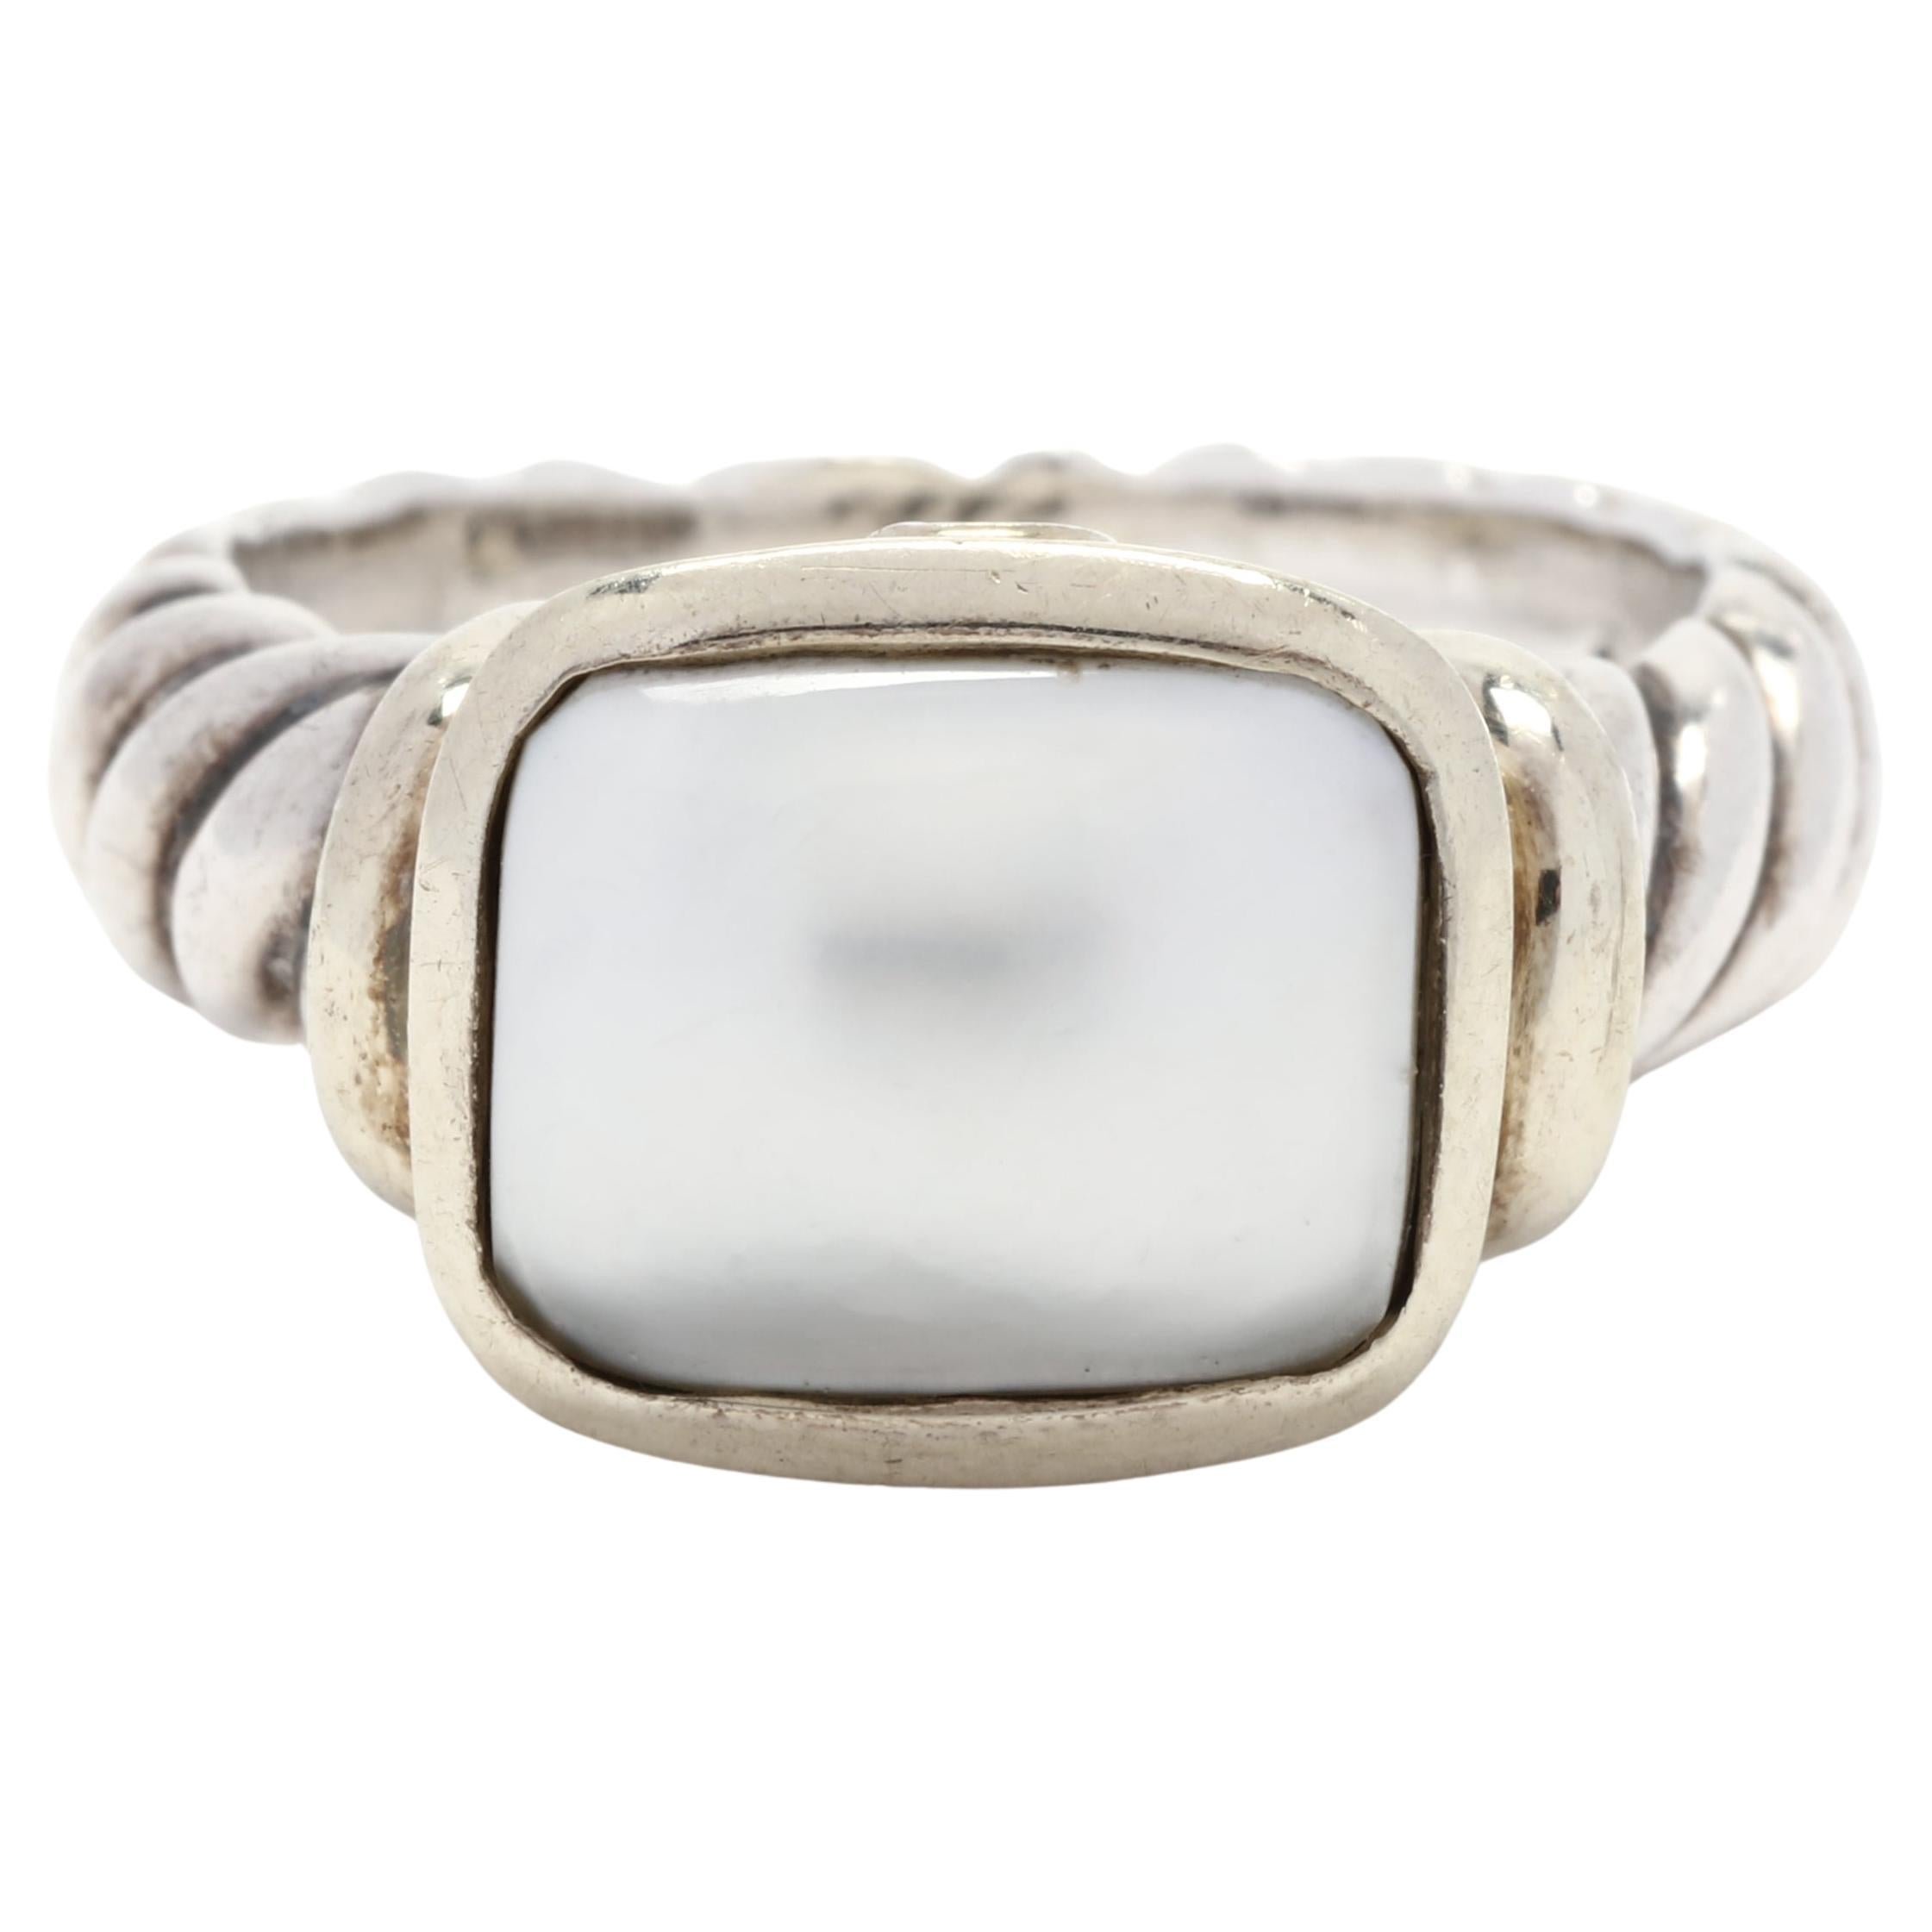 David Yurman Mabé Pearl Noblesse Ring, 14K Yellow Gold Silver, Ring Size 7